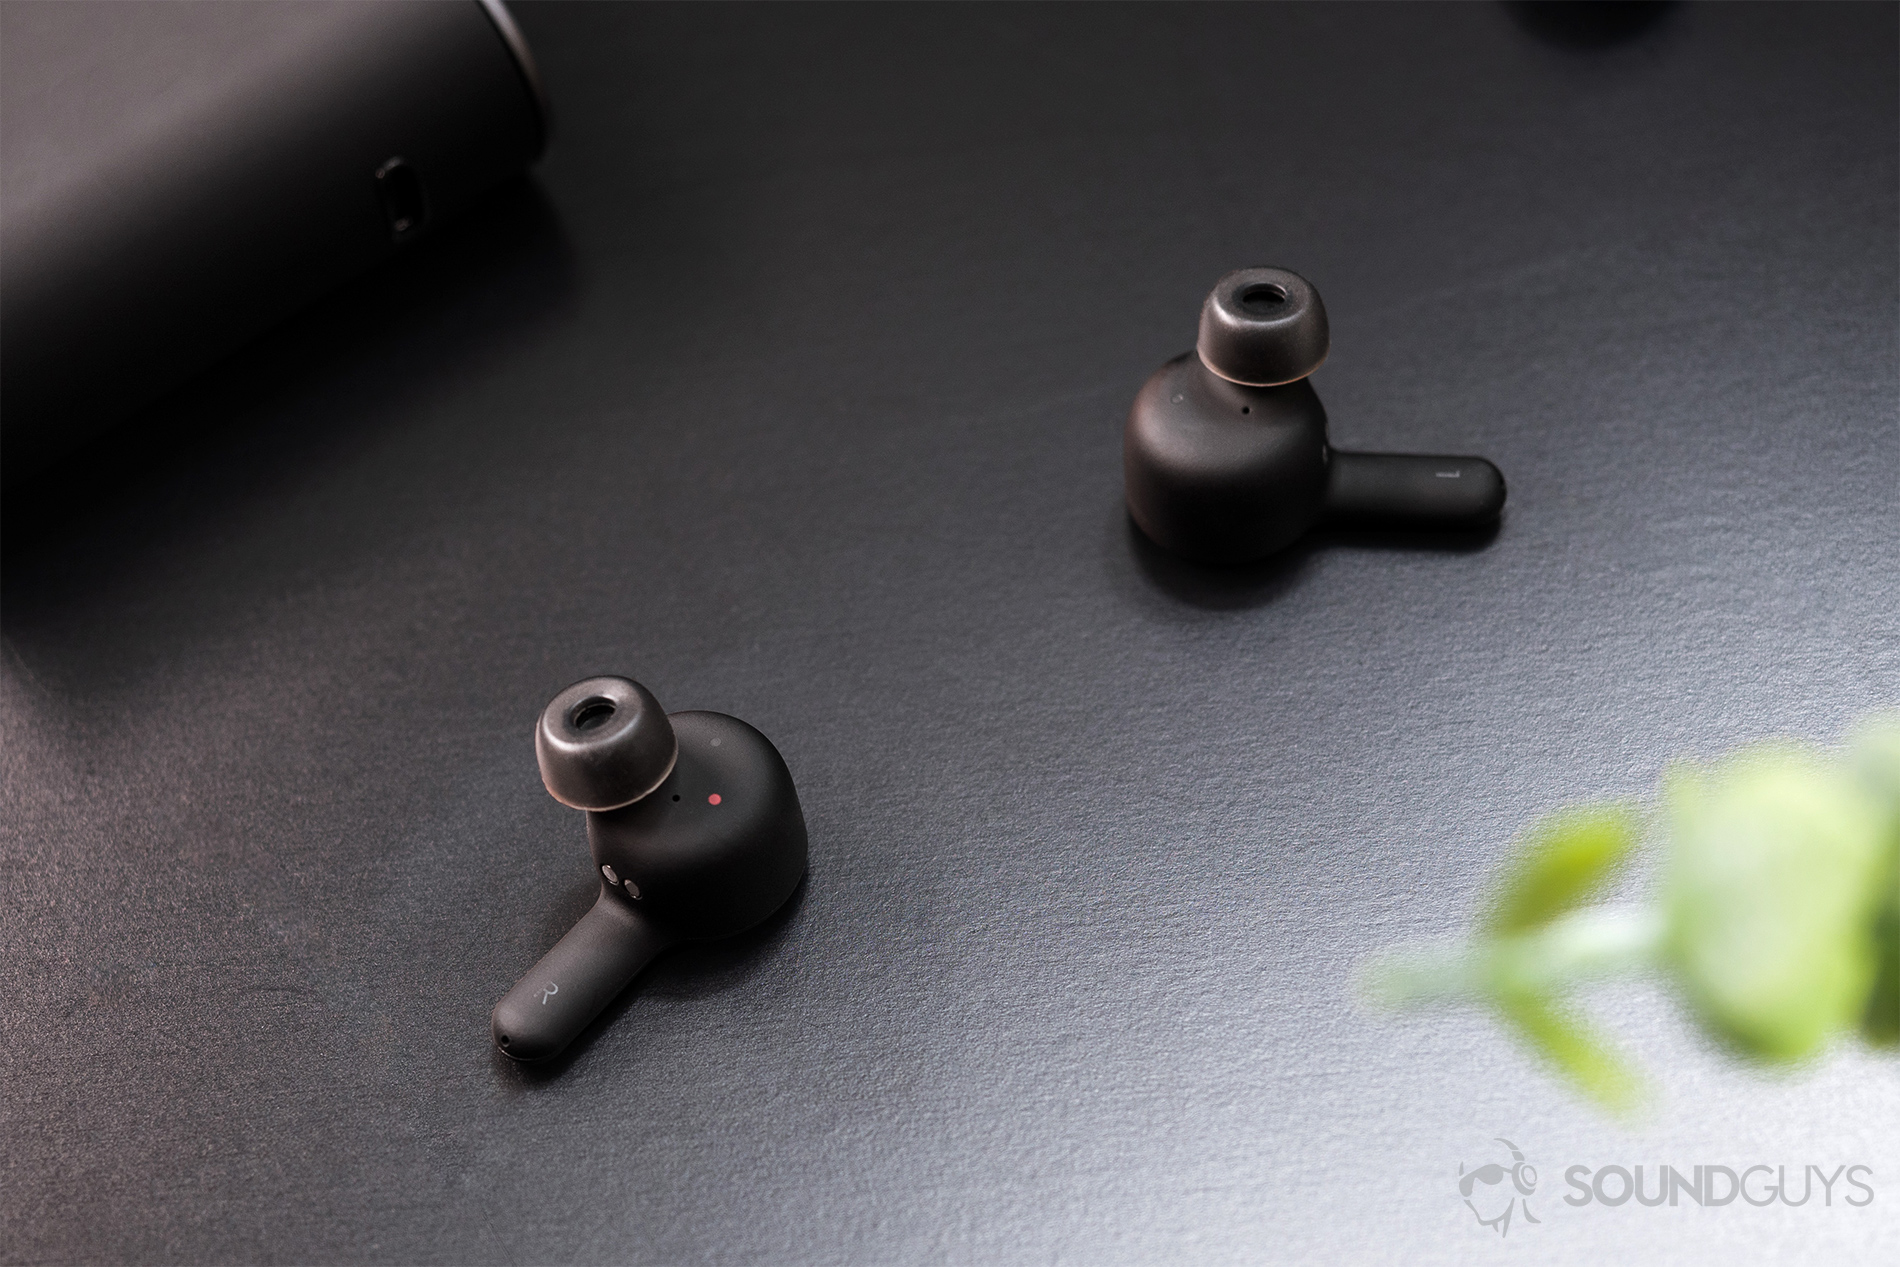 Holiday music RHA TrueConnect: An image of the earbuds on a black surface with the charging case poking out from the top left corner.